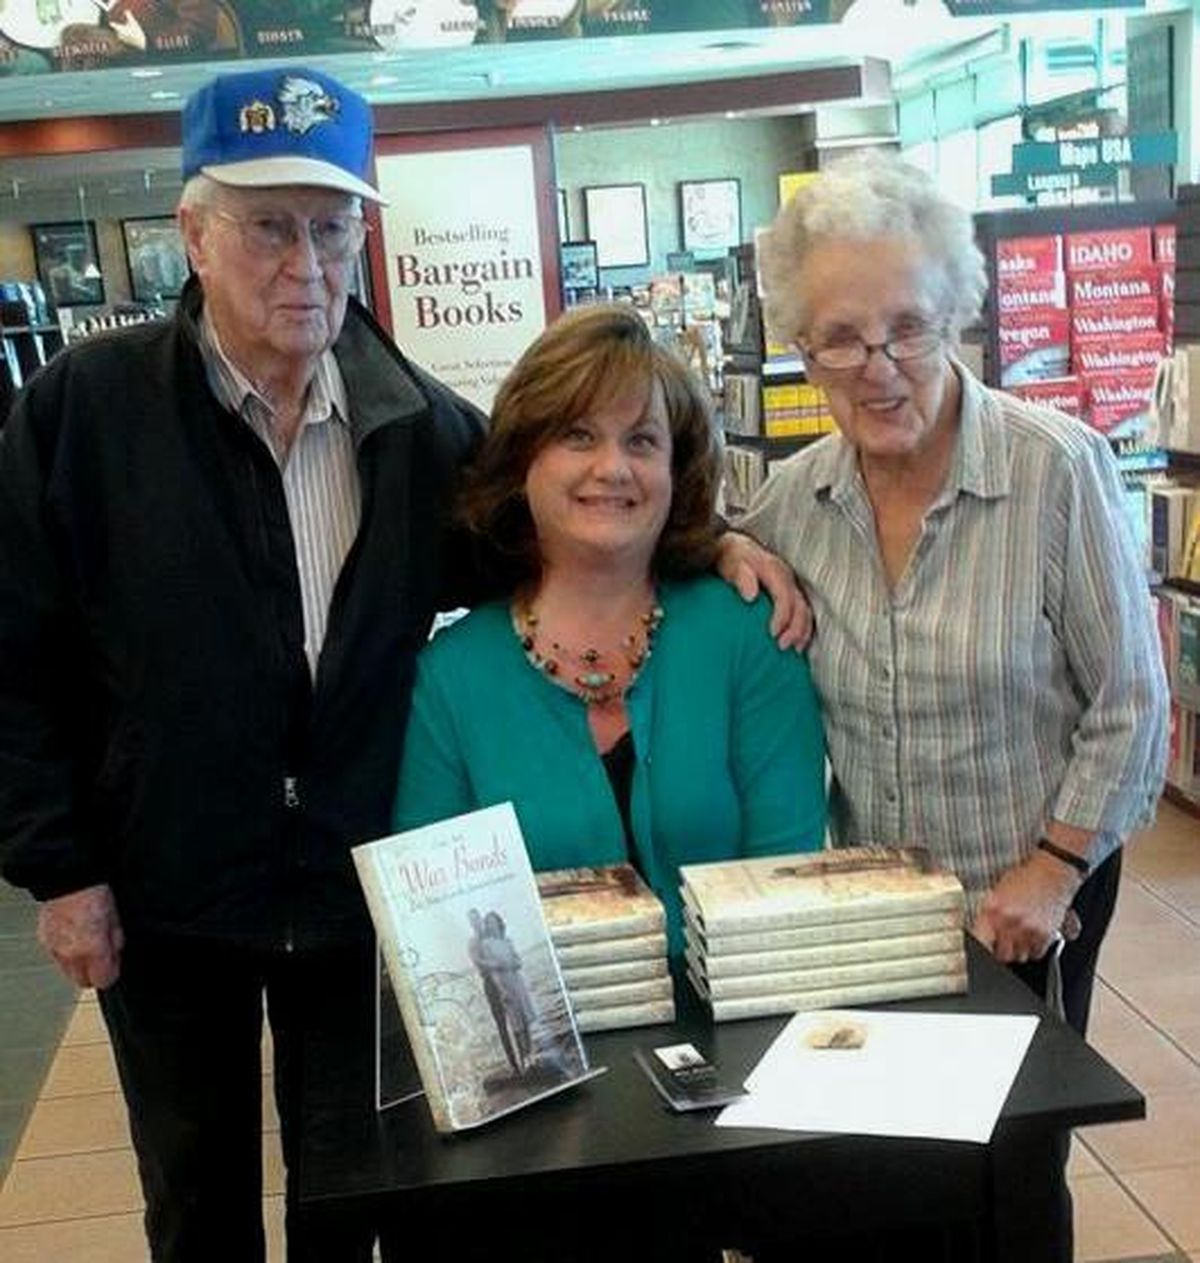 Rusty and Marie Clemons and Cindy Hval are photographed at Hval’s book signing in April 2015 at Spokane Valley Barnes and Noble. (Cindy Hval / The Spokesman-Review)